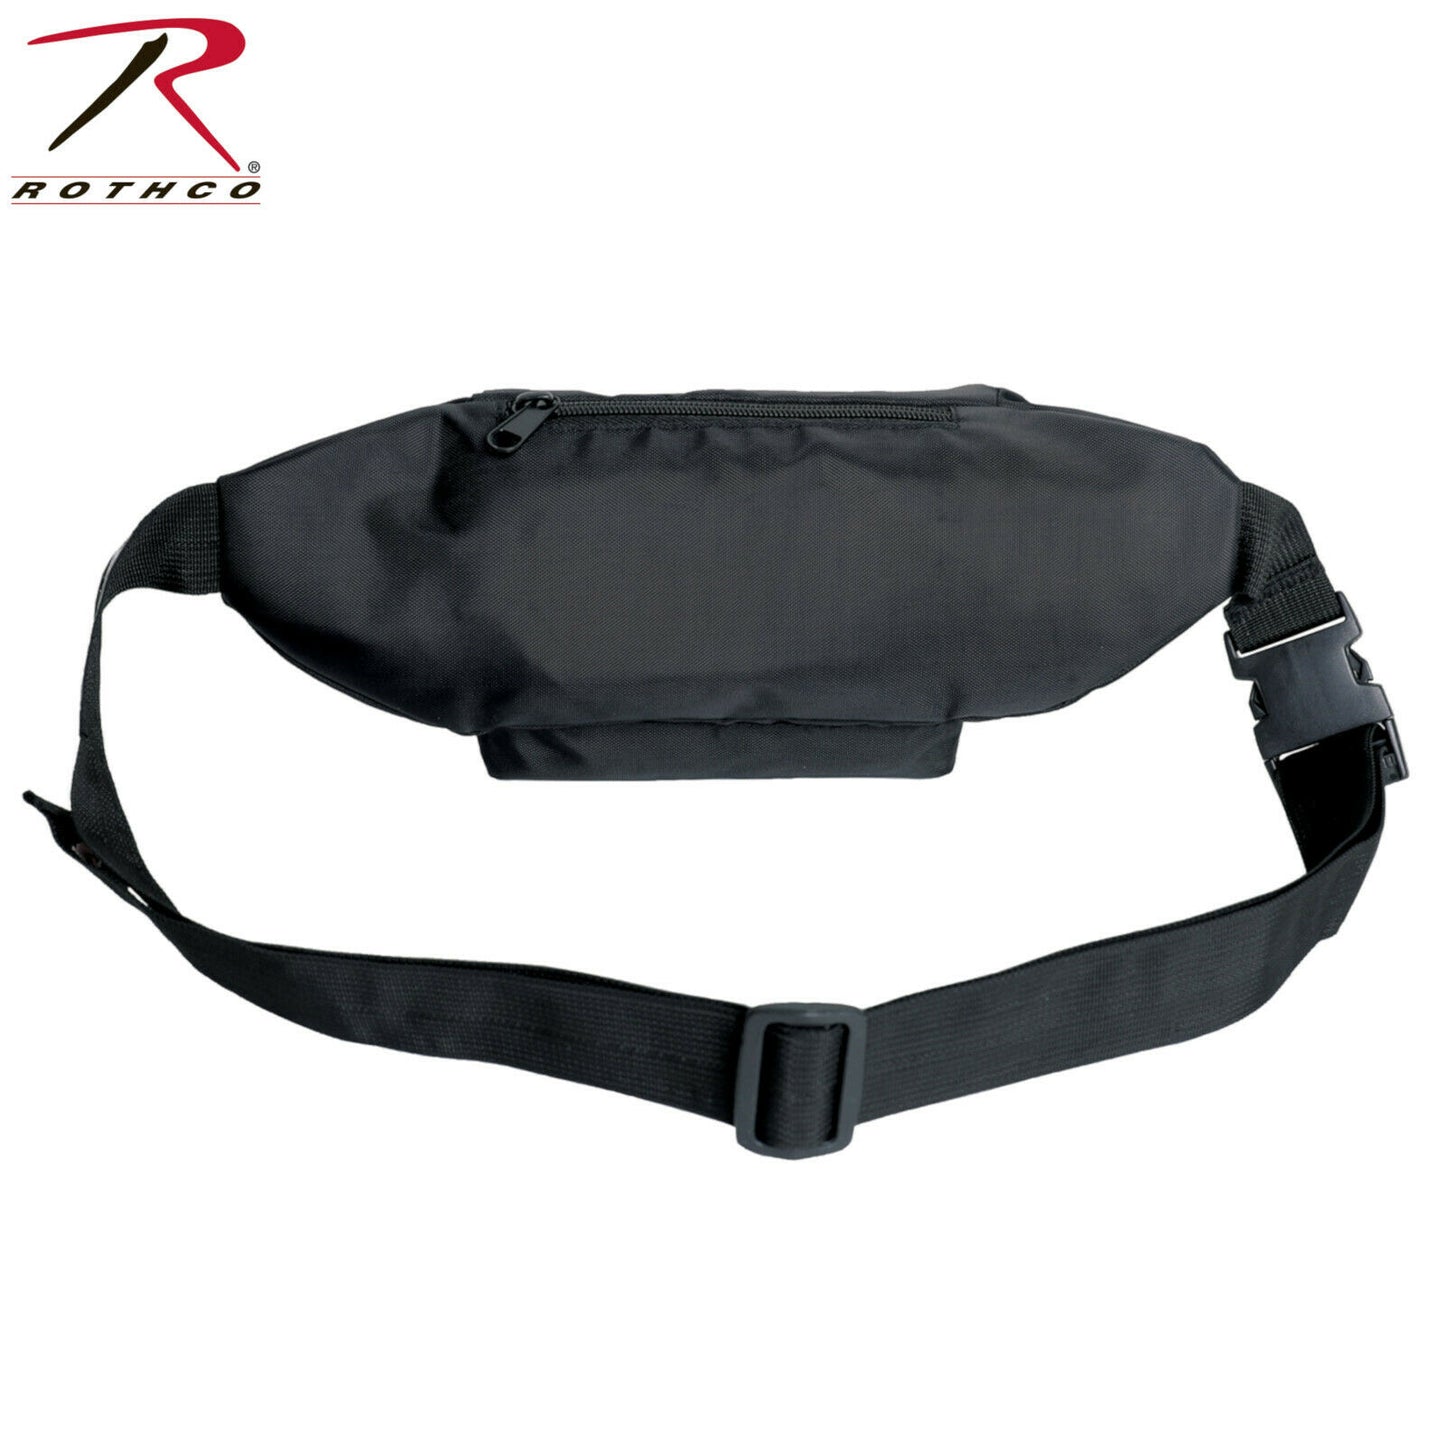 Rothco Crossbody Fanny Pack in Black - Lightweight Oxford Polyester Construction